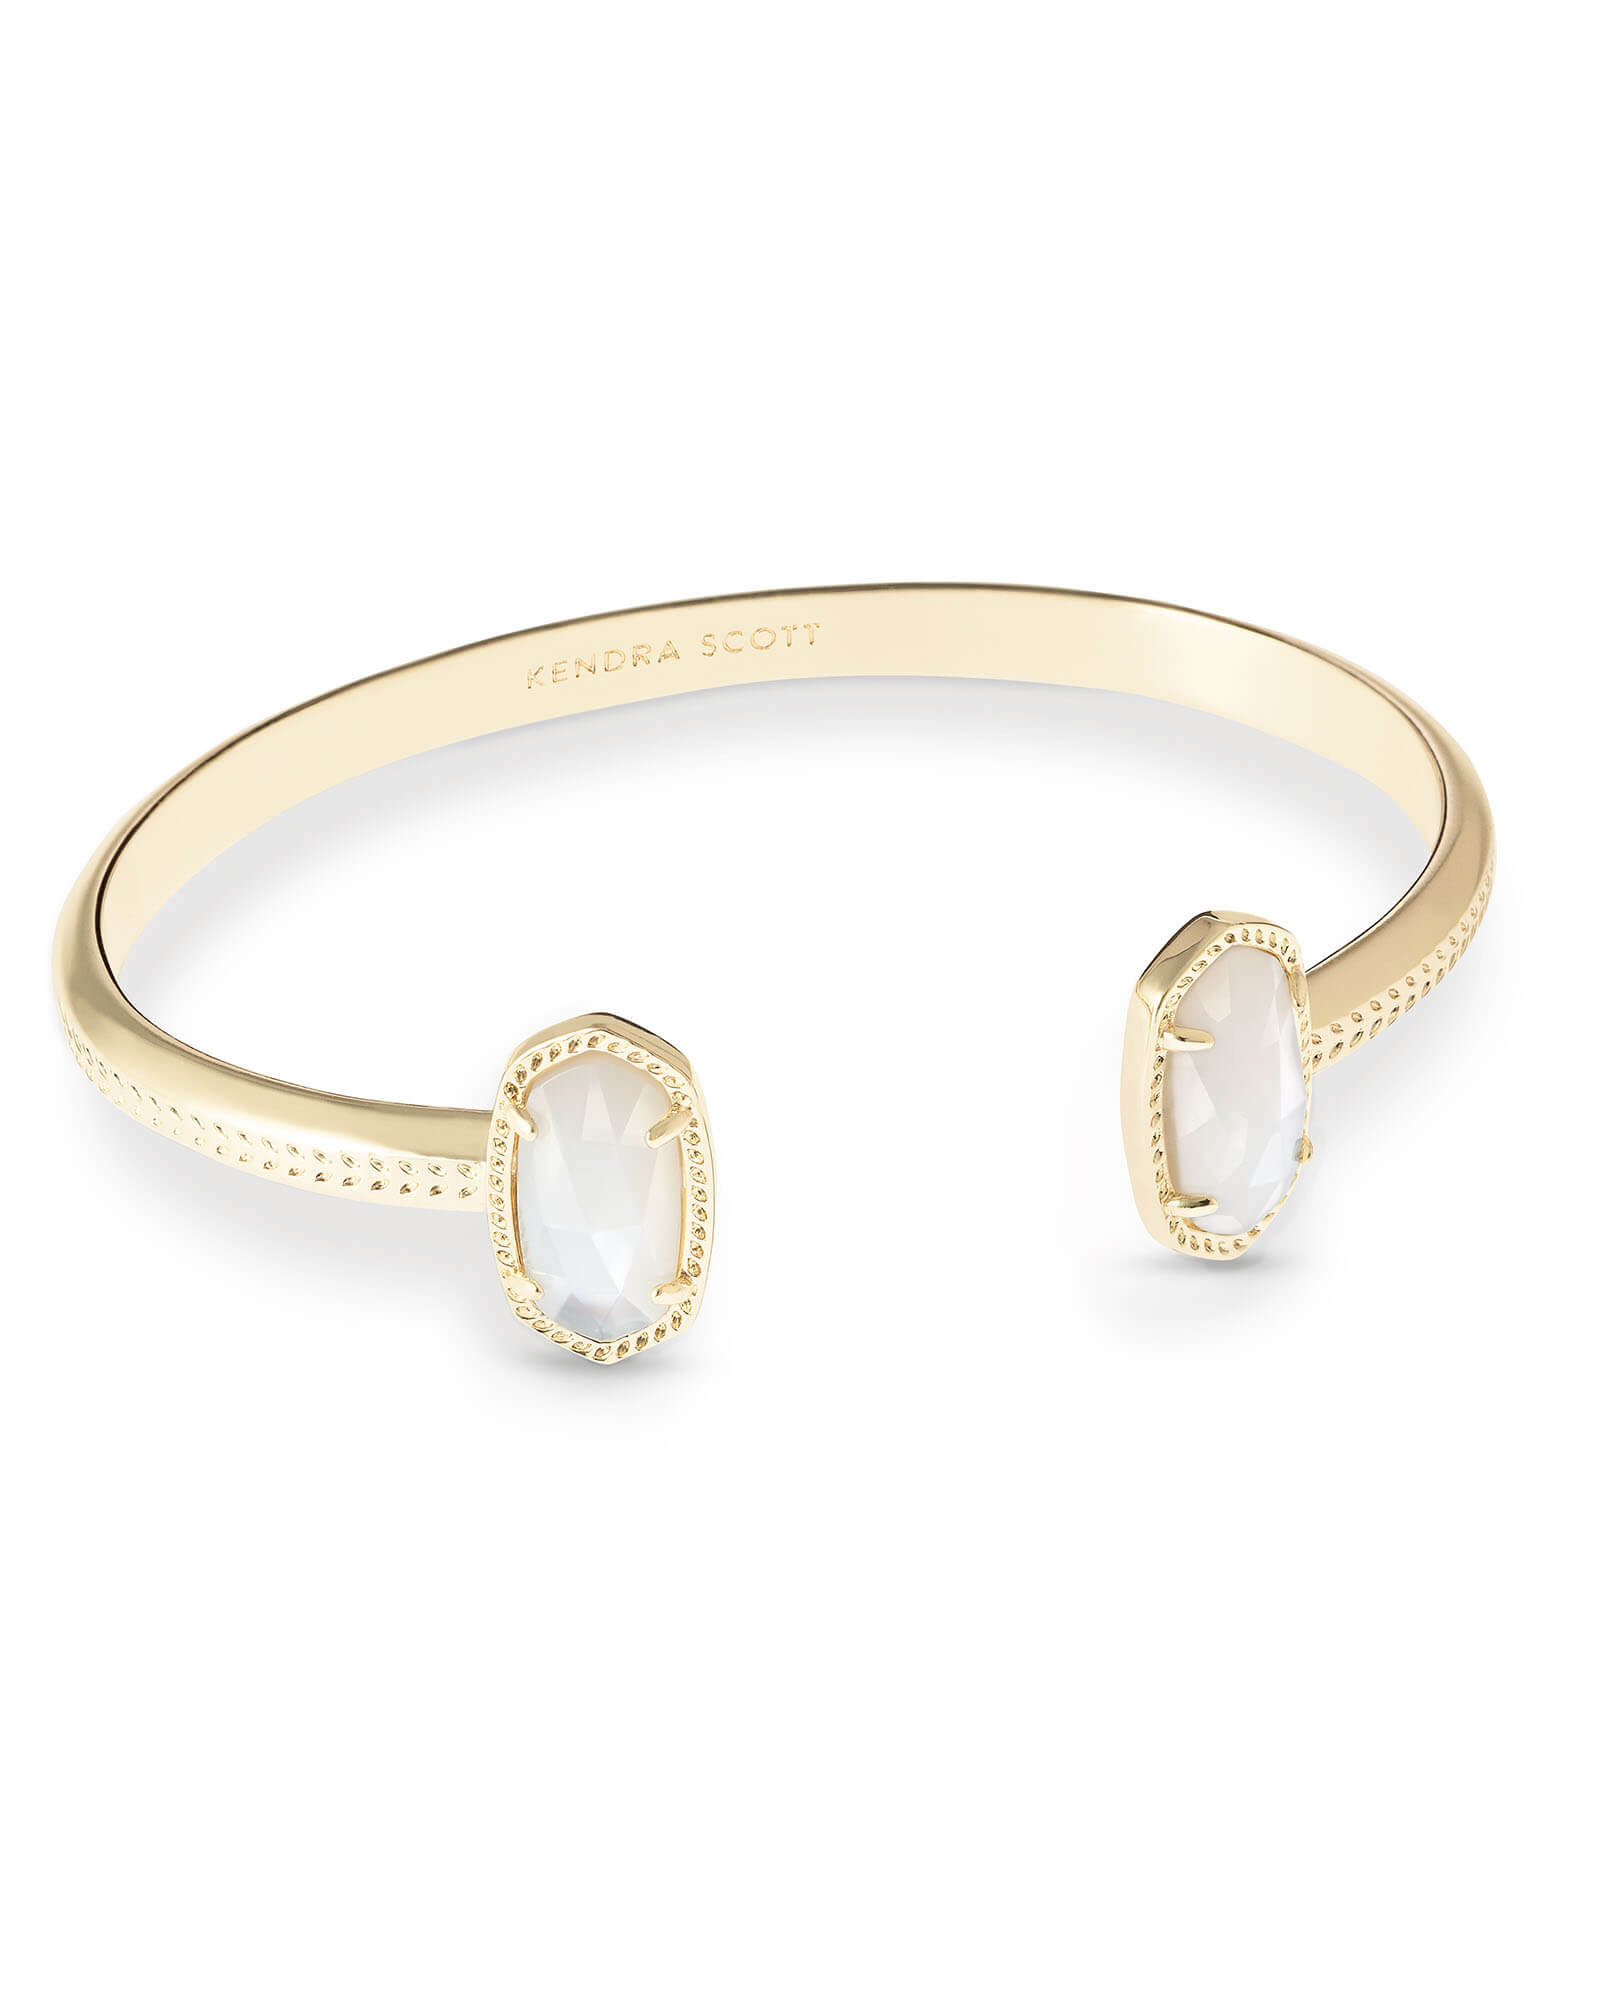 Elton Gold Cuff Bracelet in Ivory Mother Of Pearl